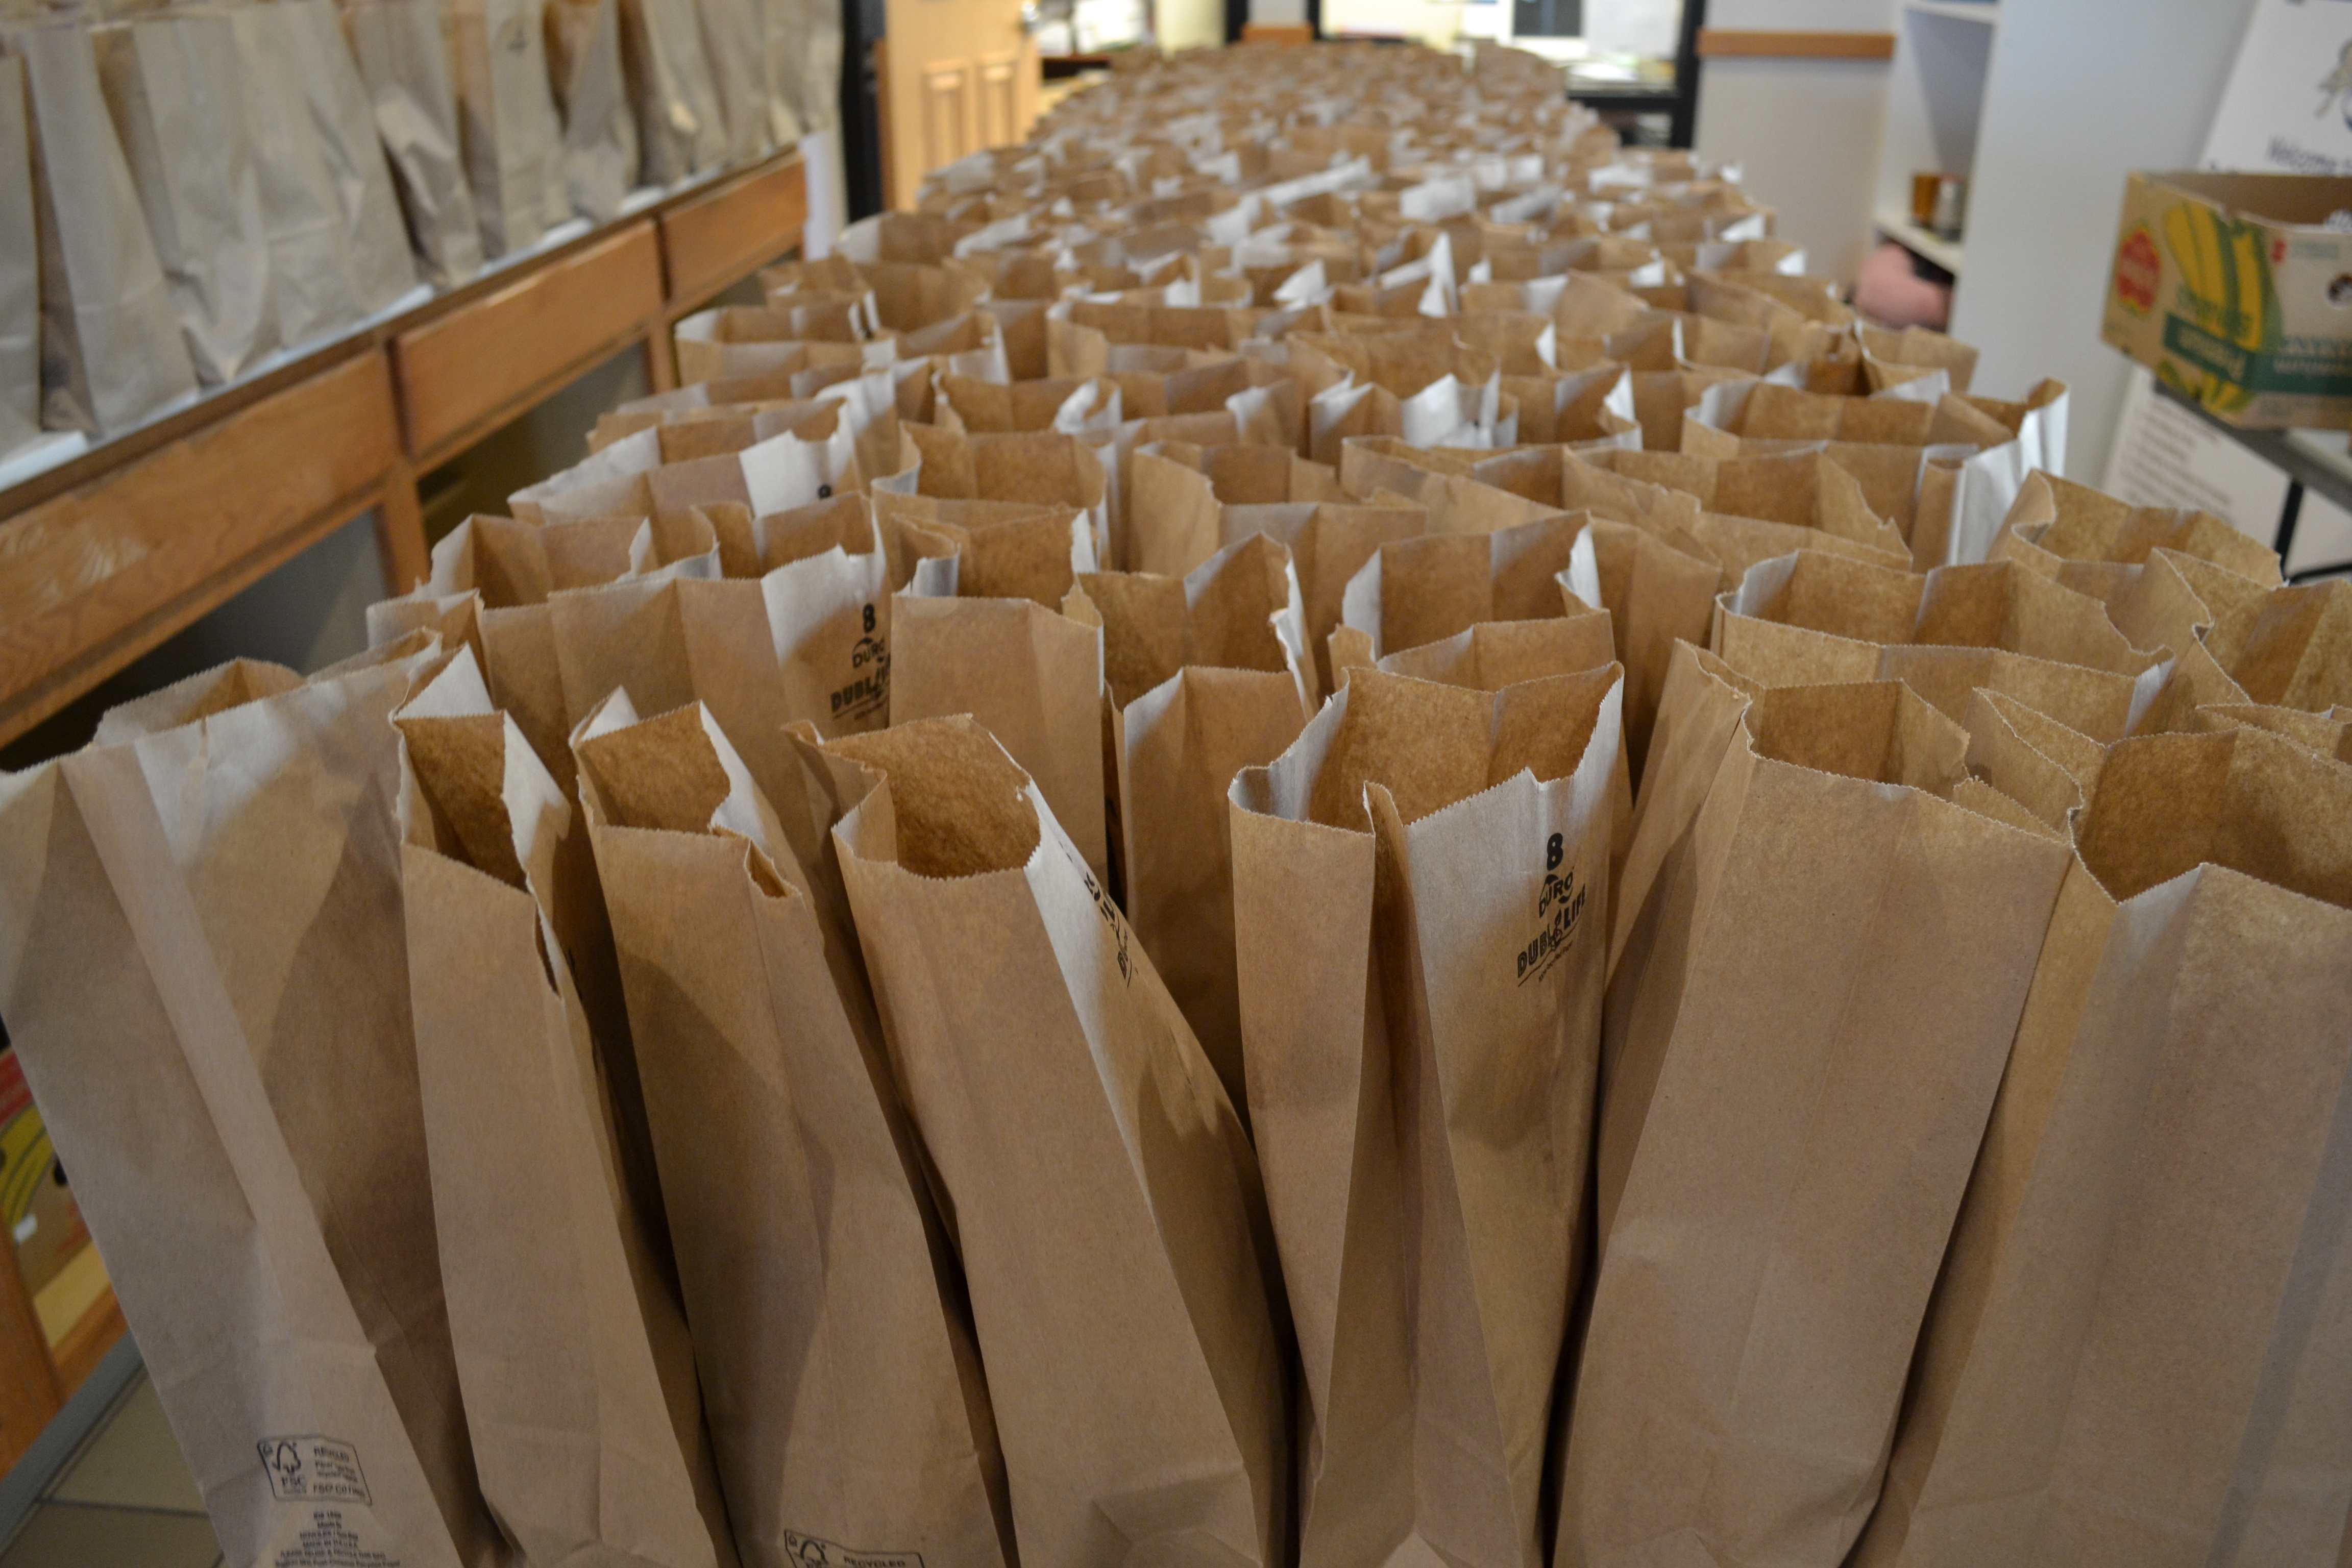 On a table, hundreds of brown bags are ready for distribution. Photo by Alyssa Buckley.